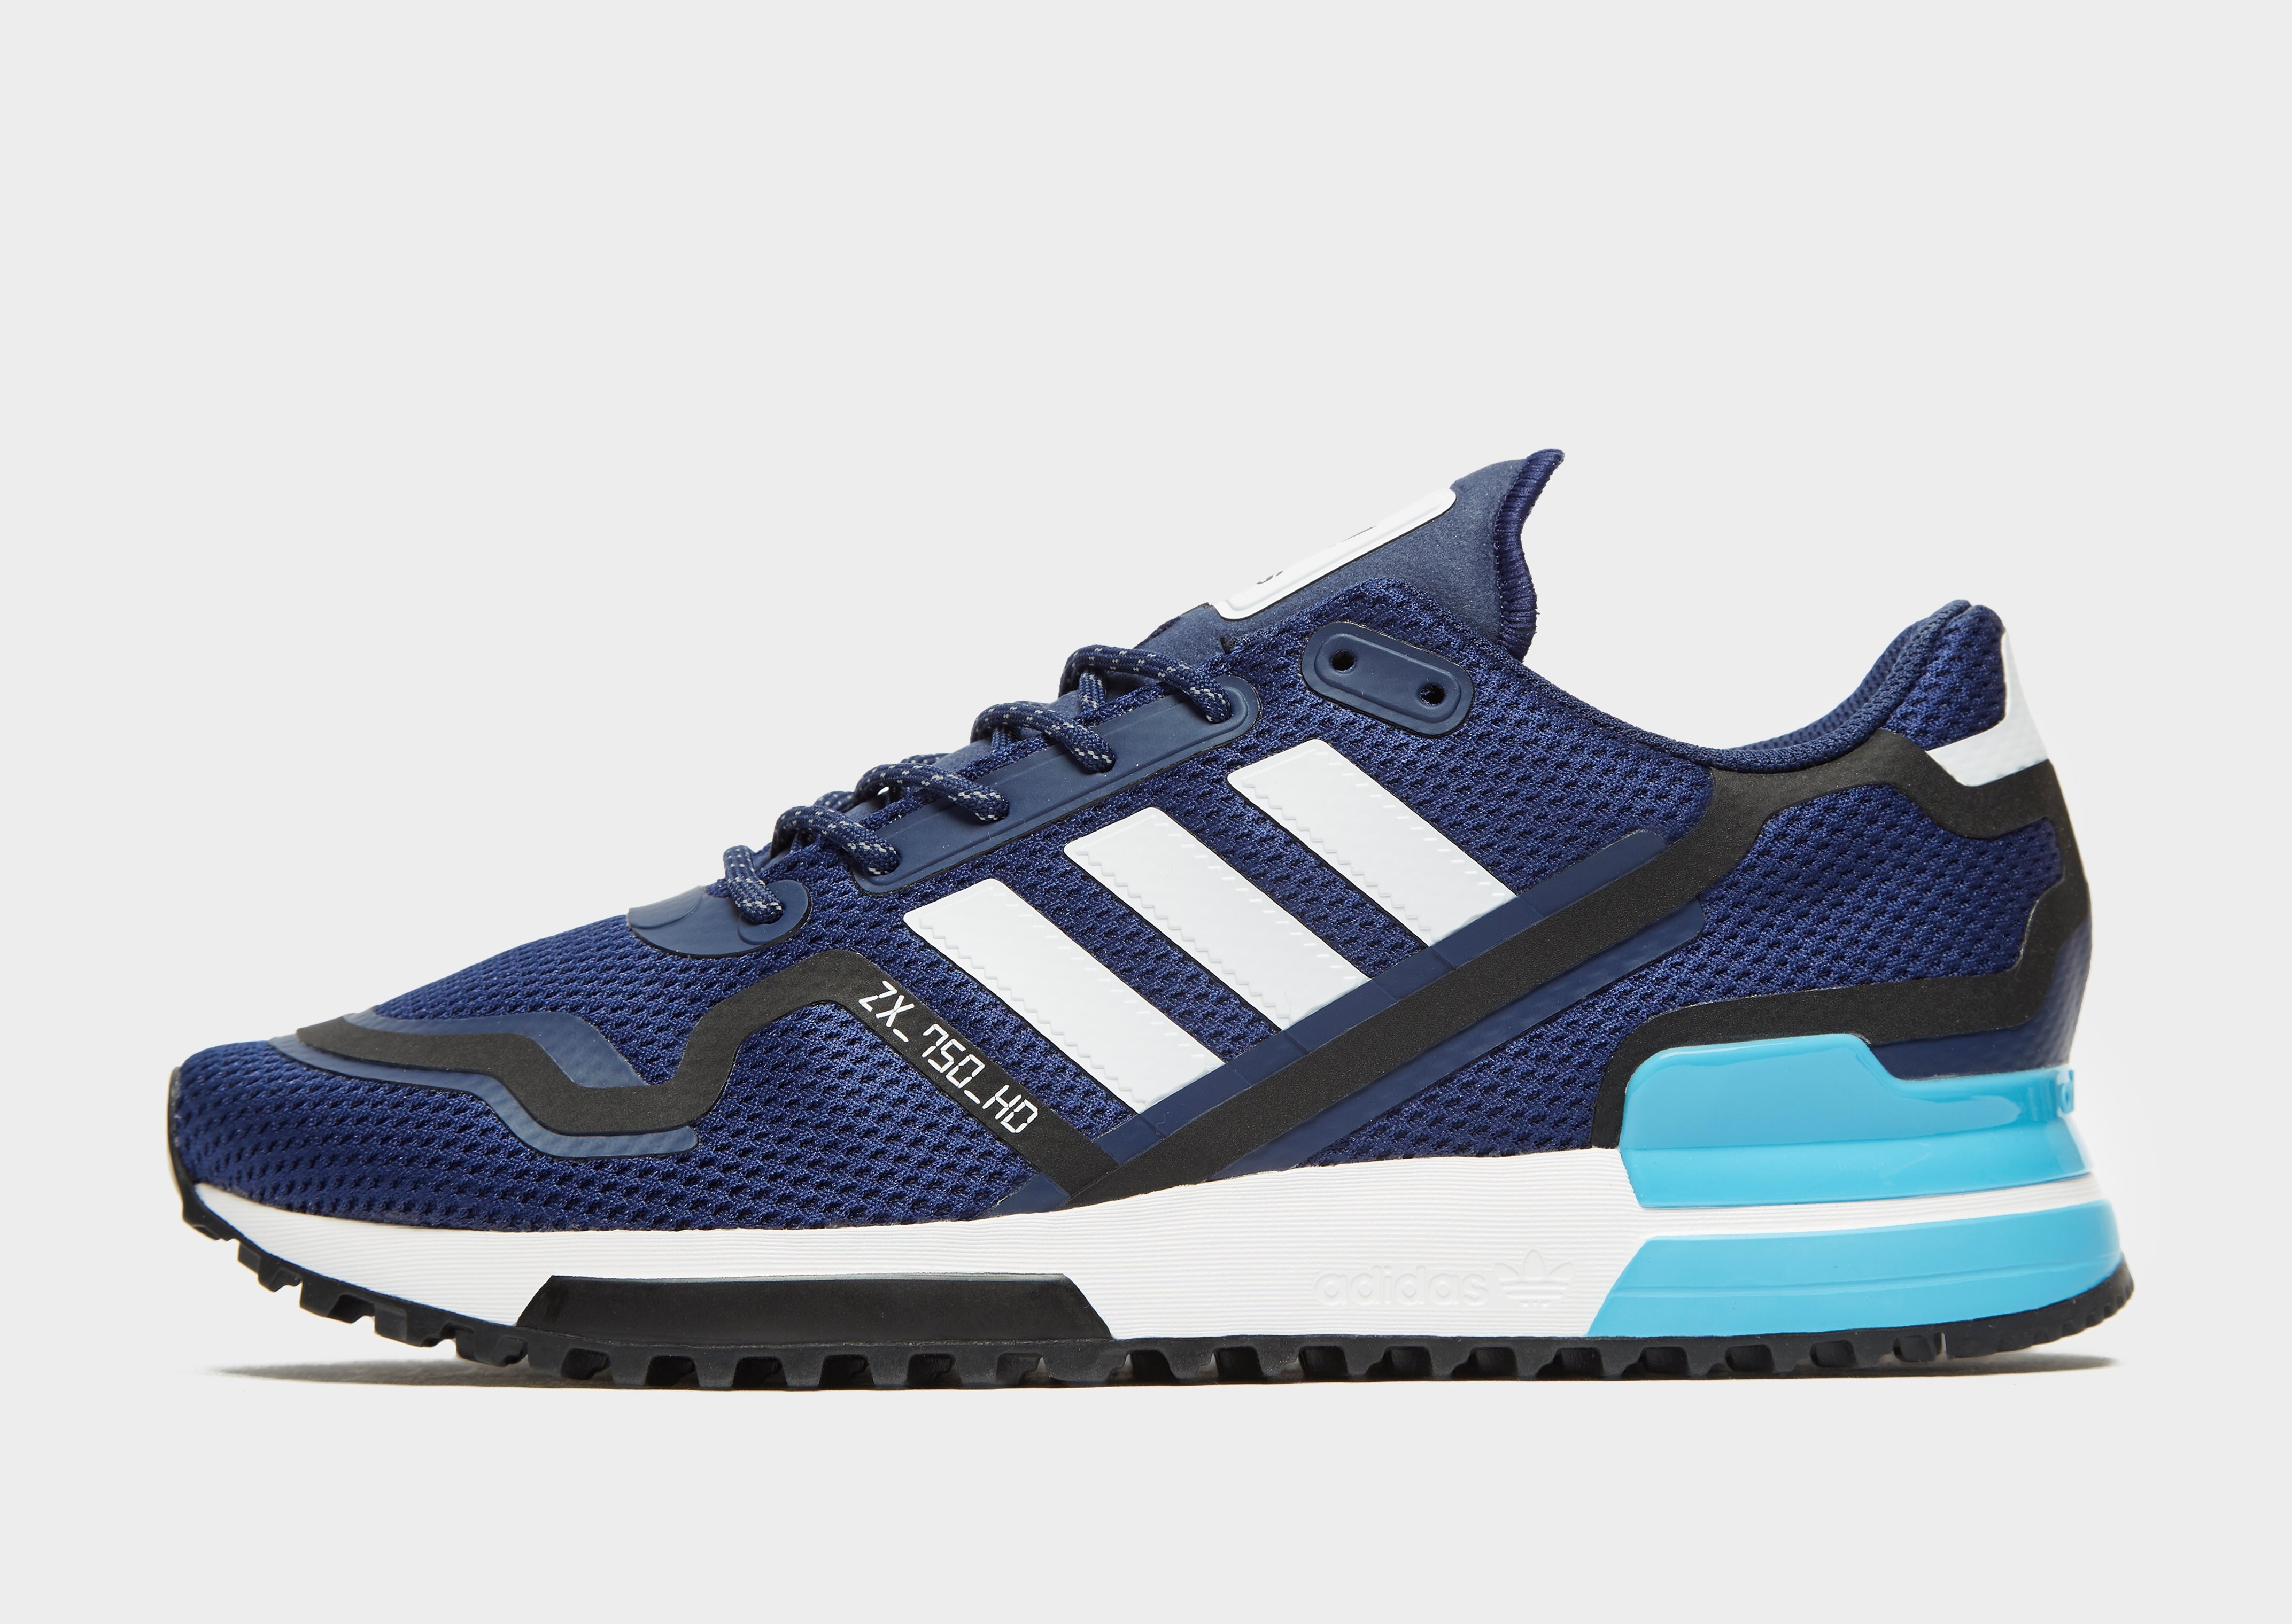 adidas zx 750 hd homme